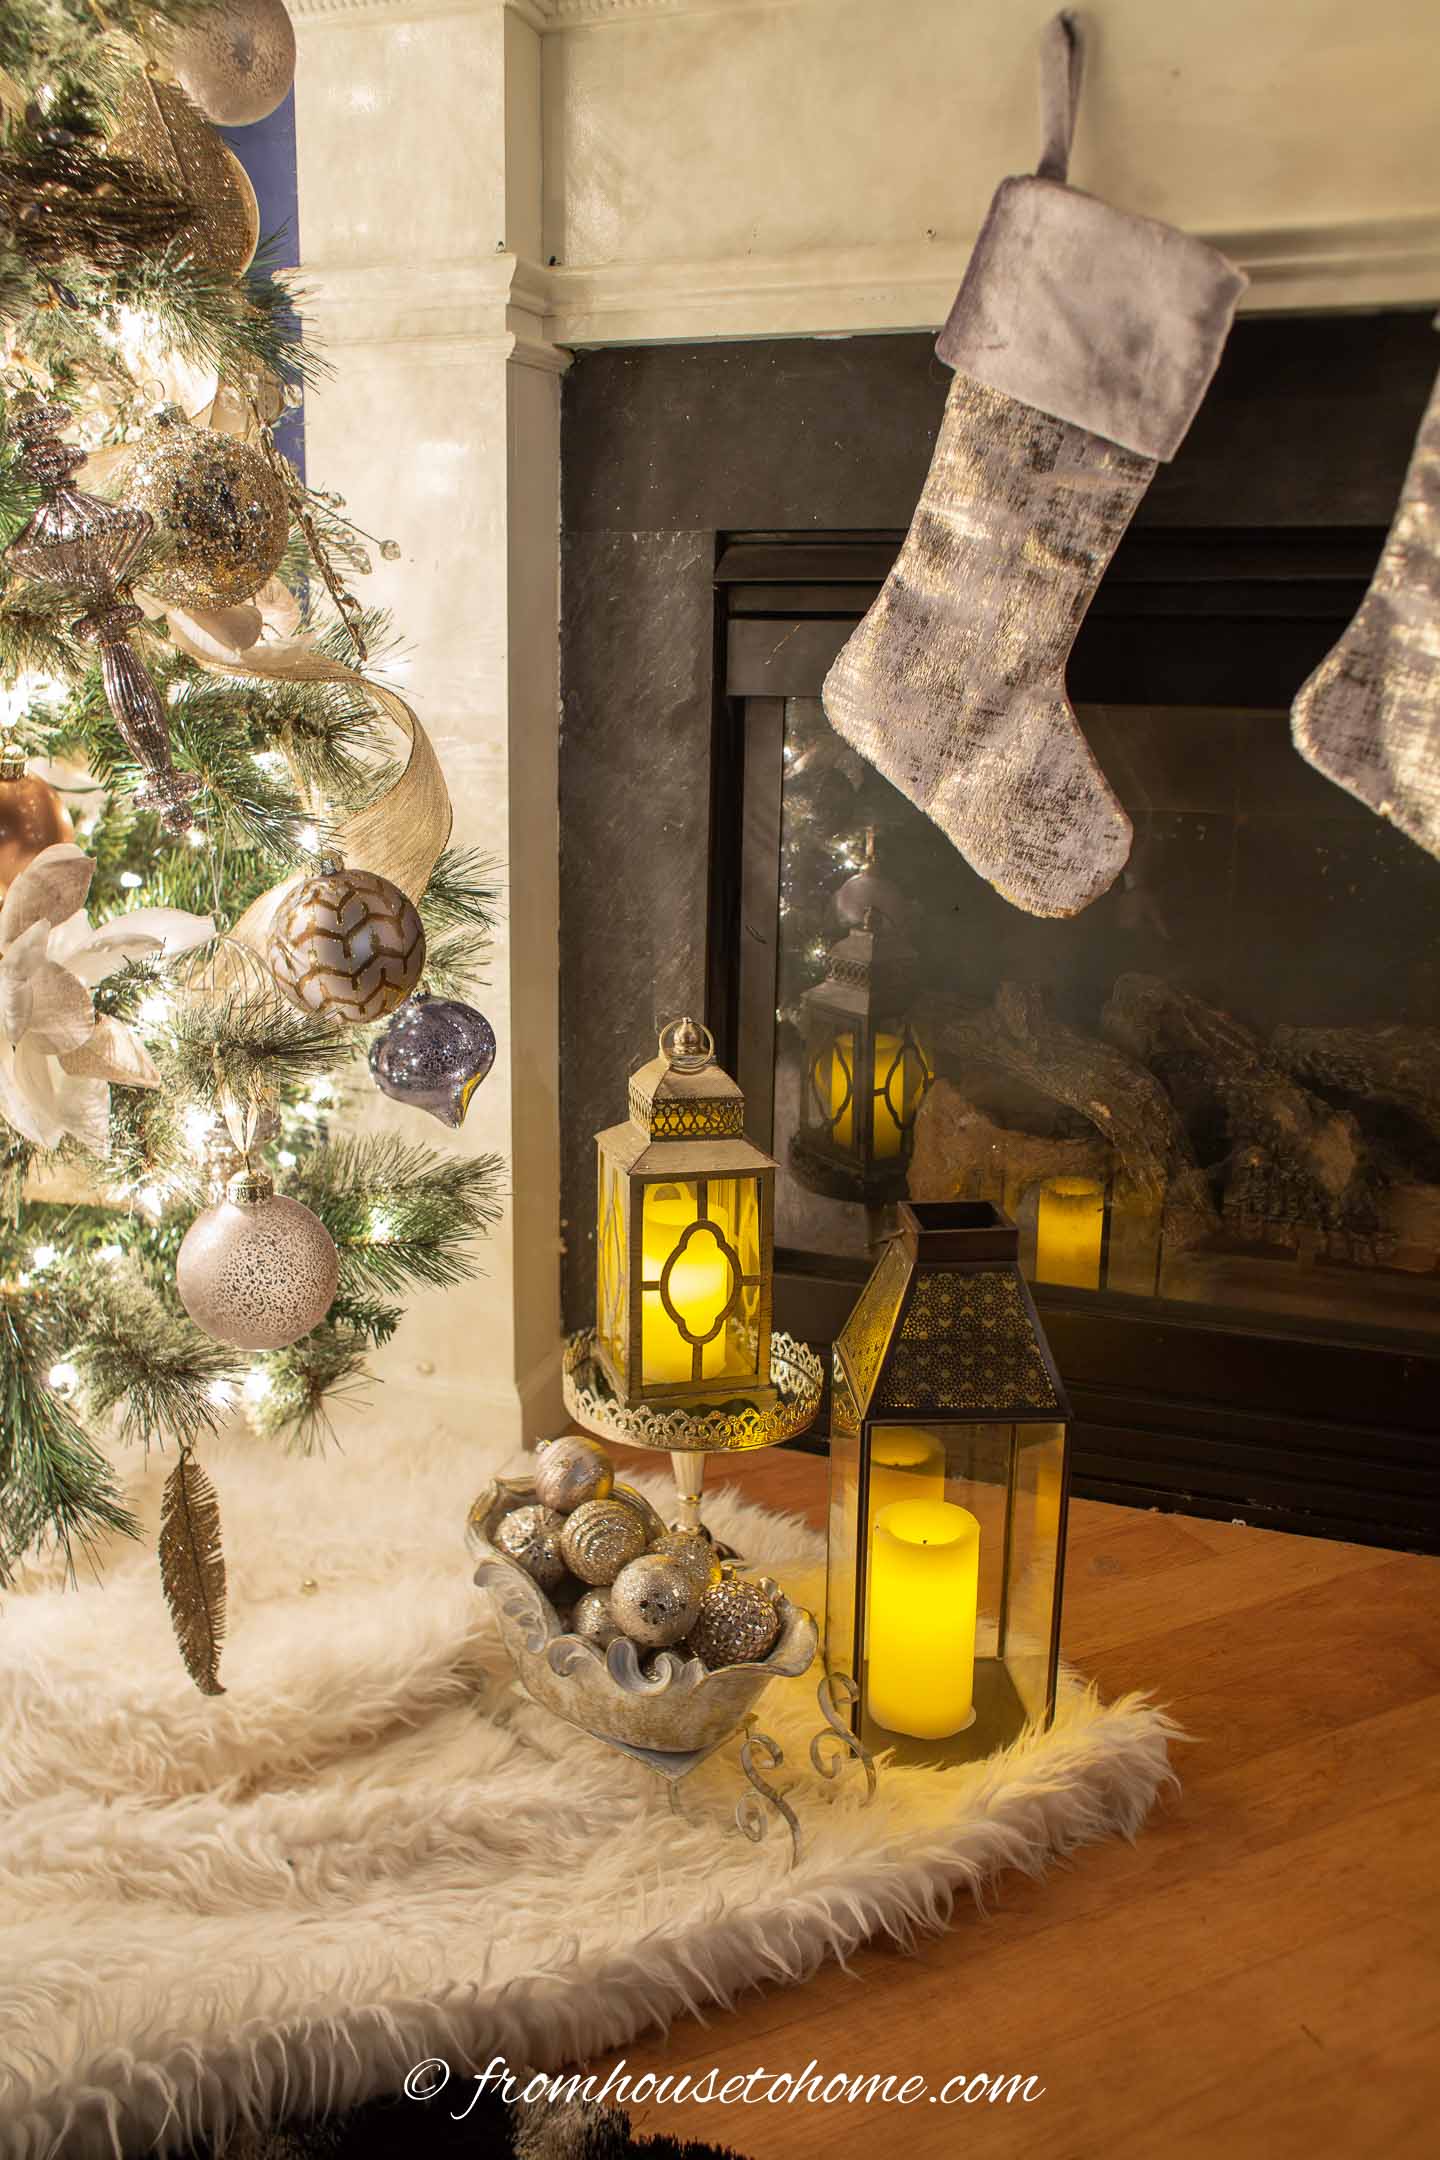 Two lanterns and a decorative sleigh filled with Christmas ornaments between the Christmas tree and the fireplace